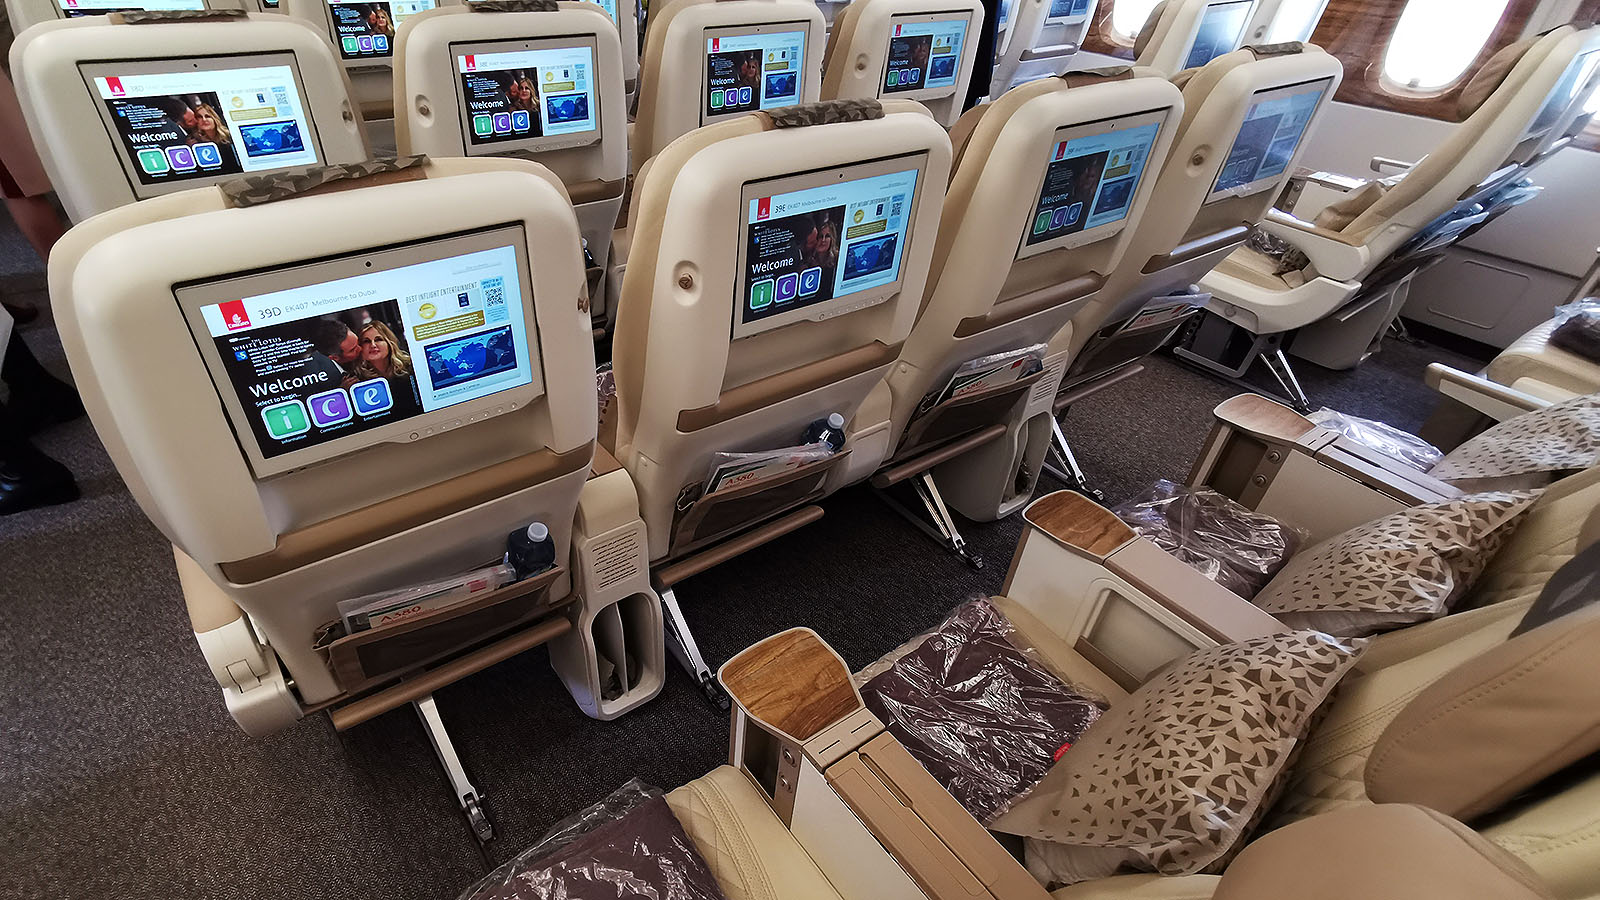 Inflight entertainment in Premium Economy on Emirates' Airbus A380 from Melbourne